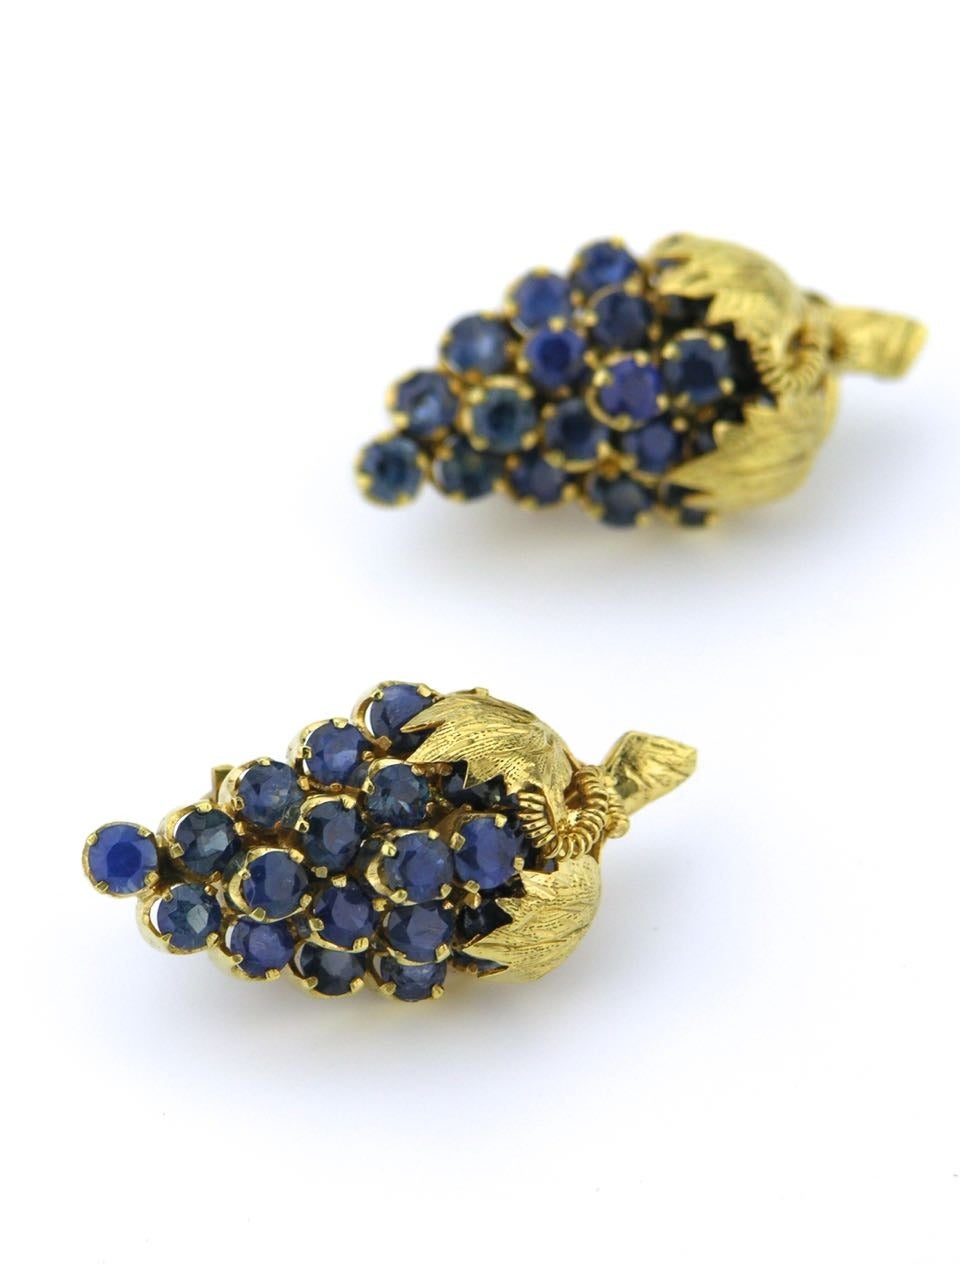 Each earring consists of a tightly set bunch of grapes motif made up of 16 round cut medium blue sapphires, capped with a pair of leaves and trailing vine - marked 14k.